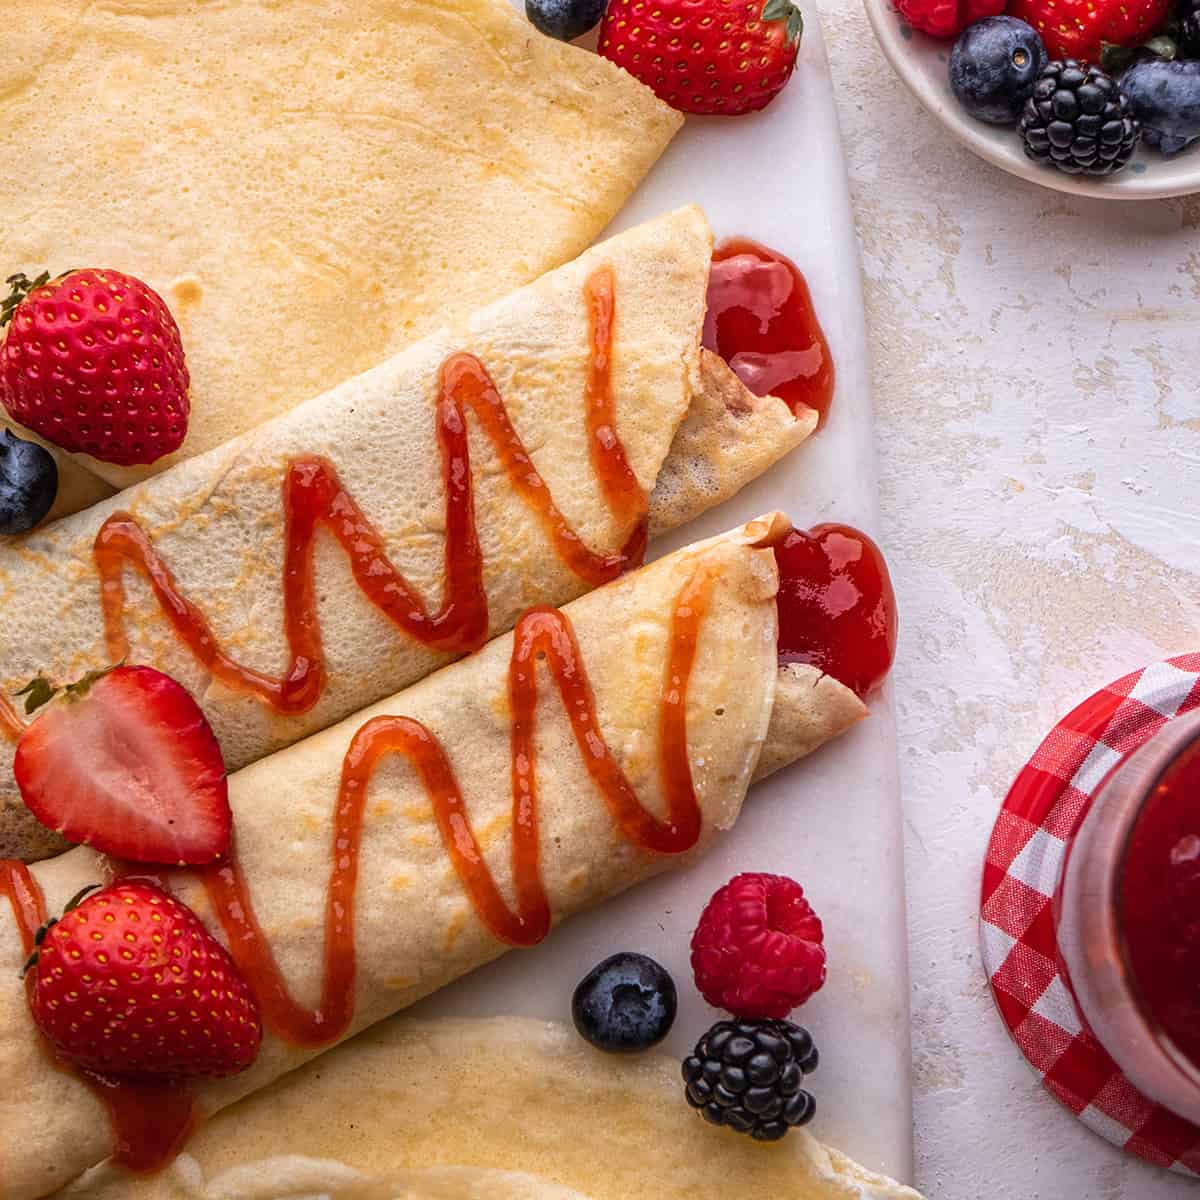 two crepes filled and drizzled with strawberry jam